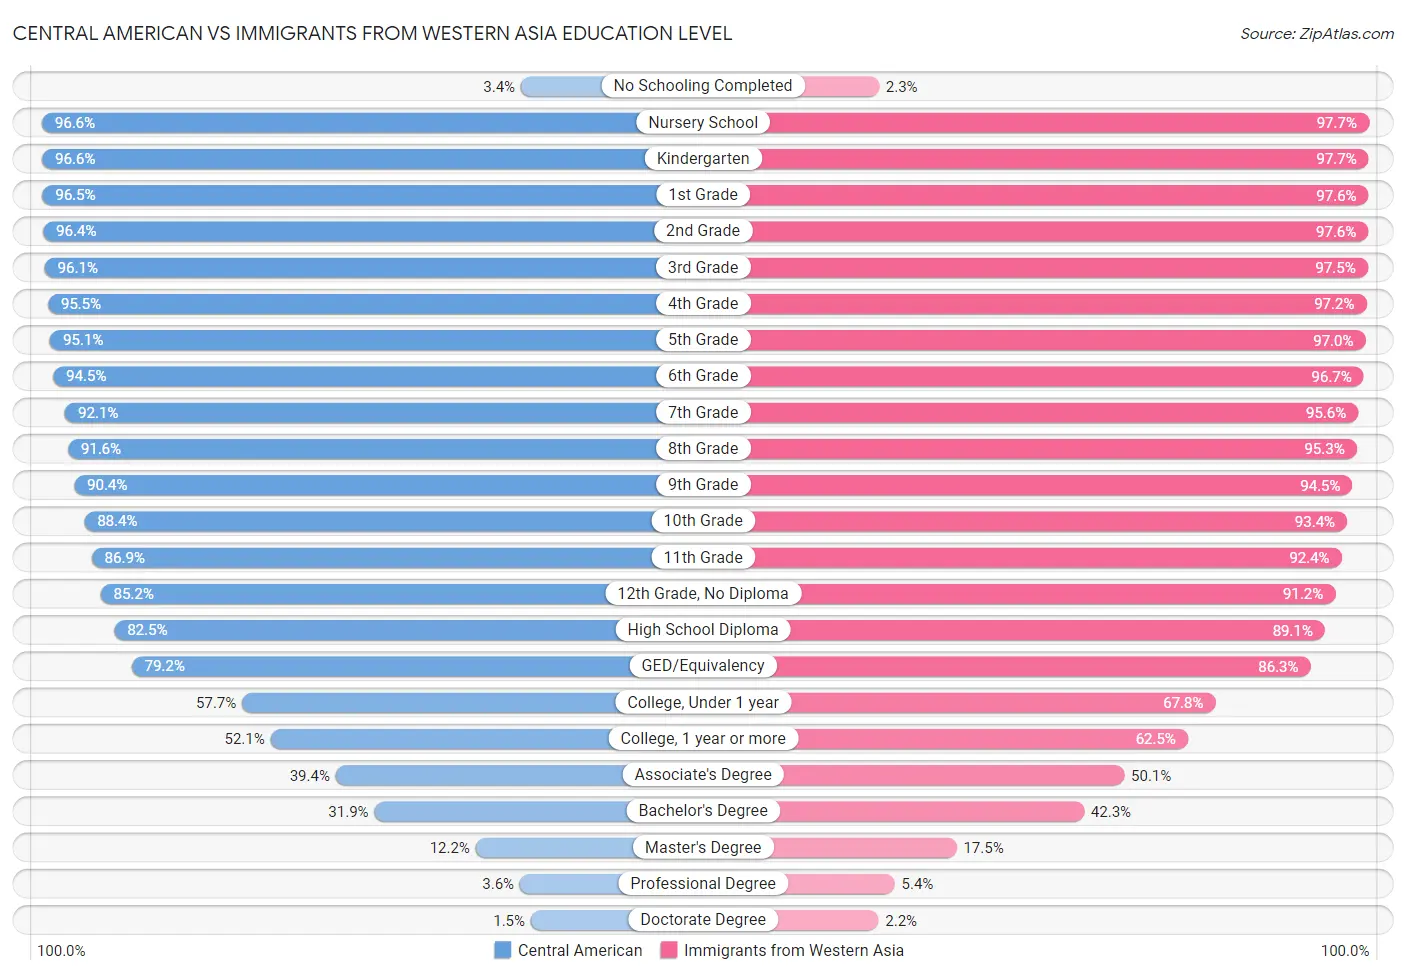 Central American vs Immigrants from Western Asia Education Level